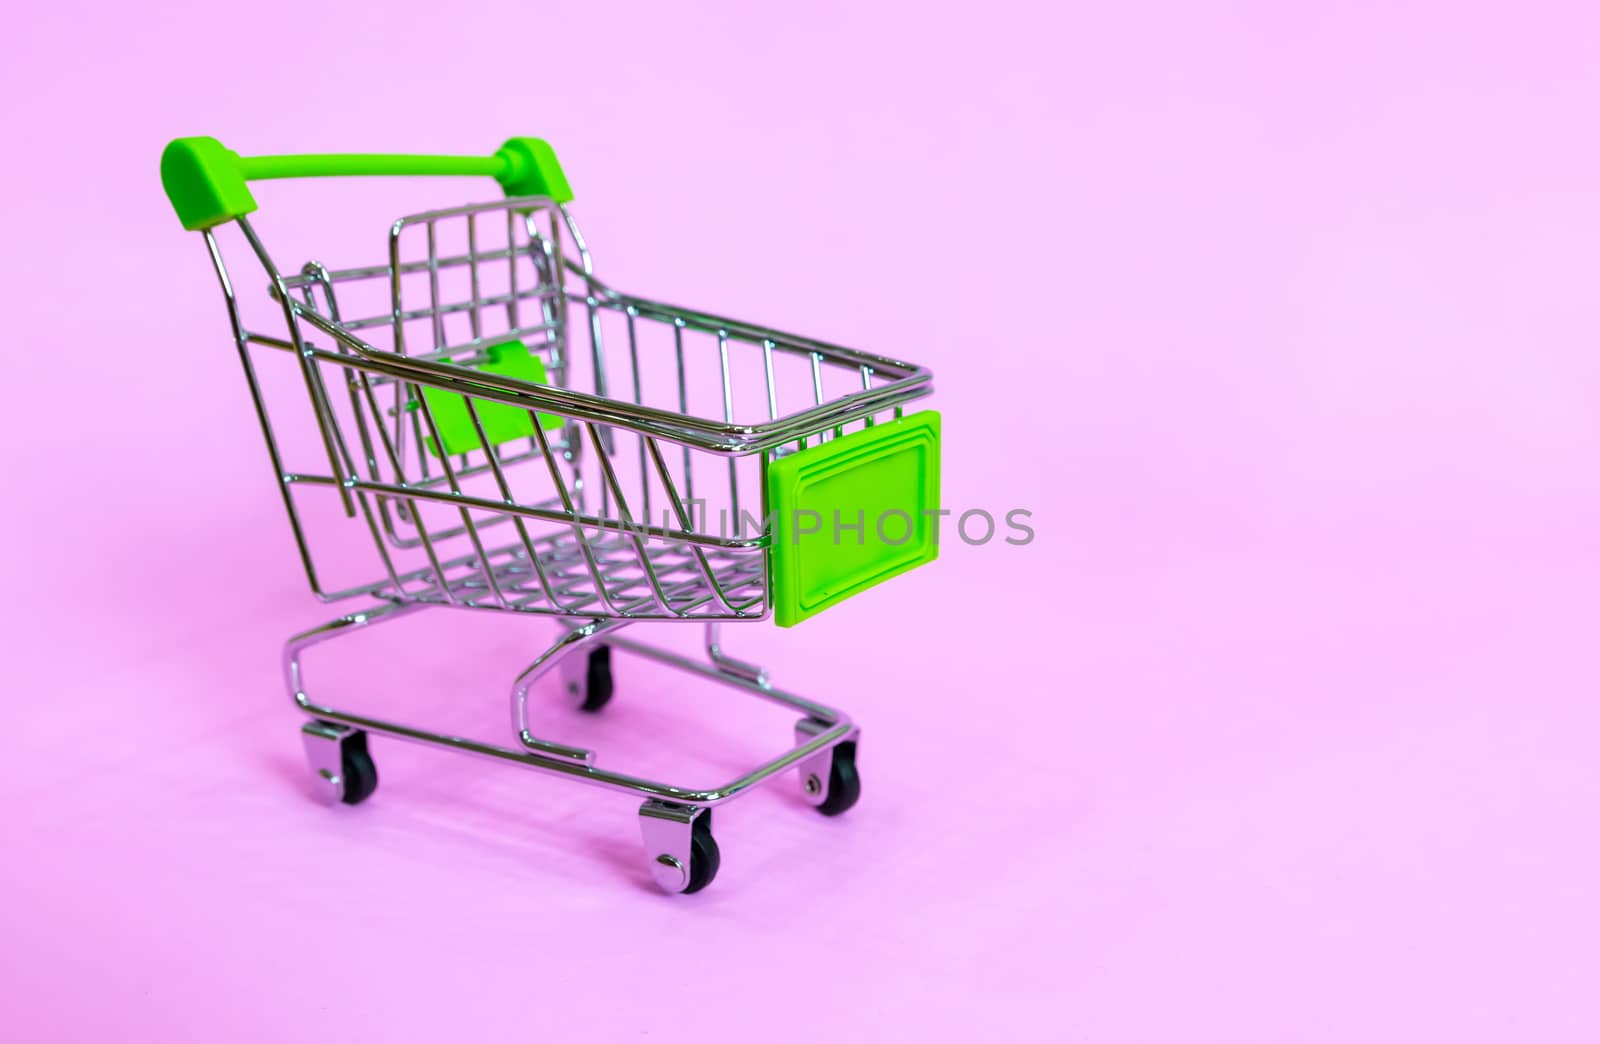 Shopping cart in the supermarket on a purple background by sompongtom